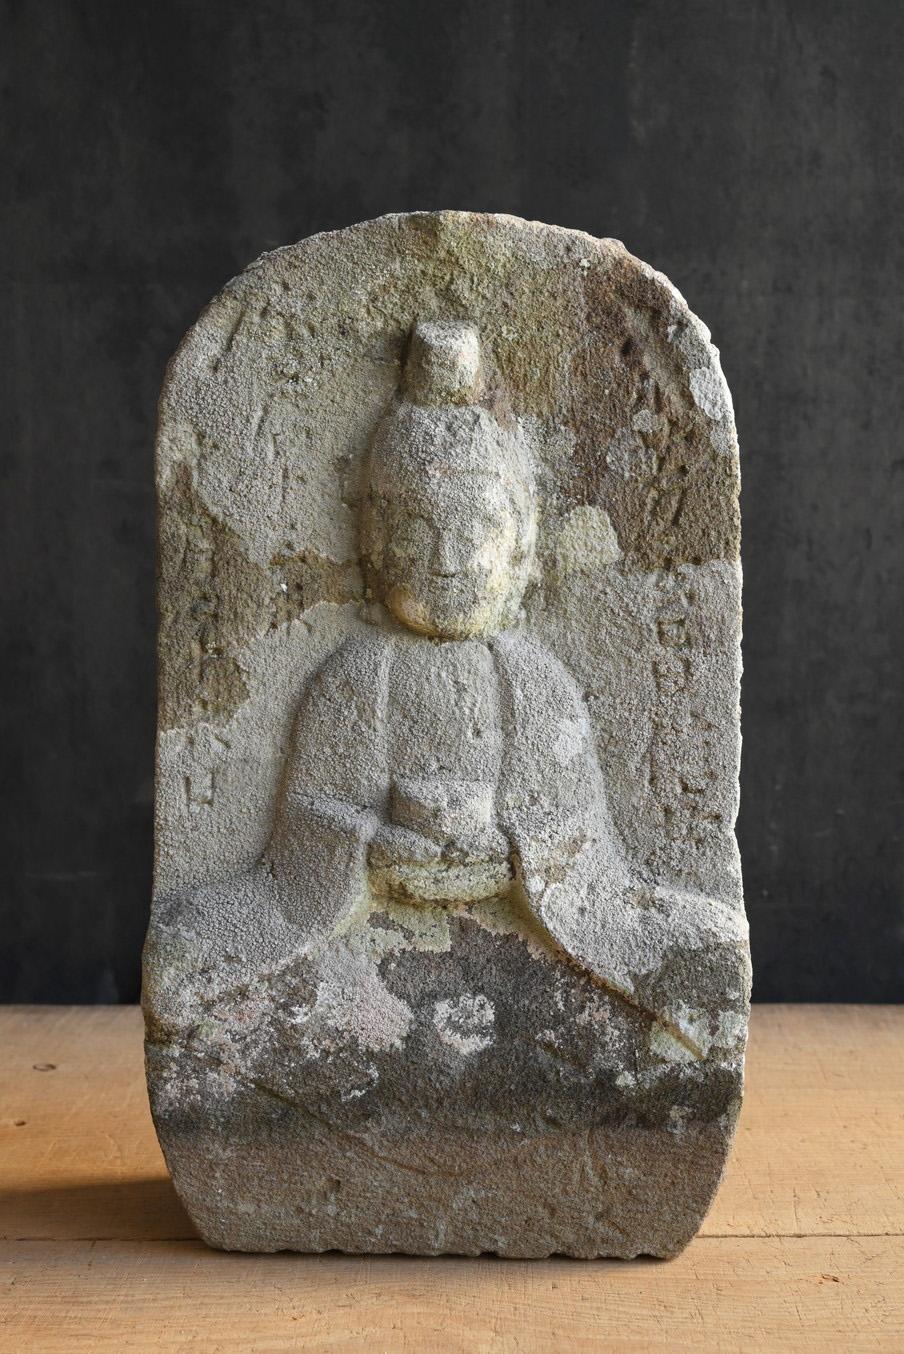 This is a stone Buddha made in 1763 during the middle of the Edo period in Japan.
The deity of the Buddha statue is Kannon Bodhisattva.
Kannon Bodhisattva is the name of a Bodhisattva especially revered in Buddhism. He is the next most precious